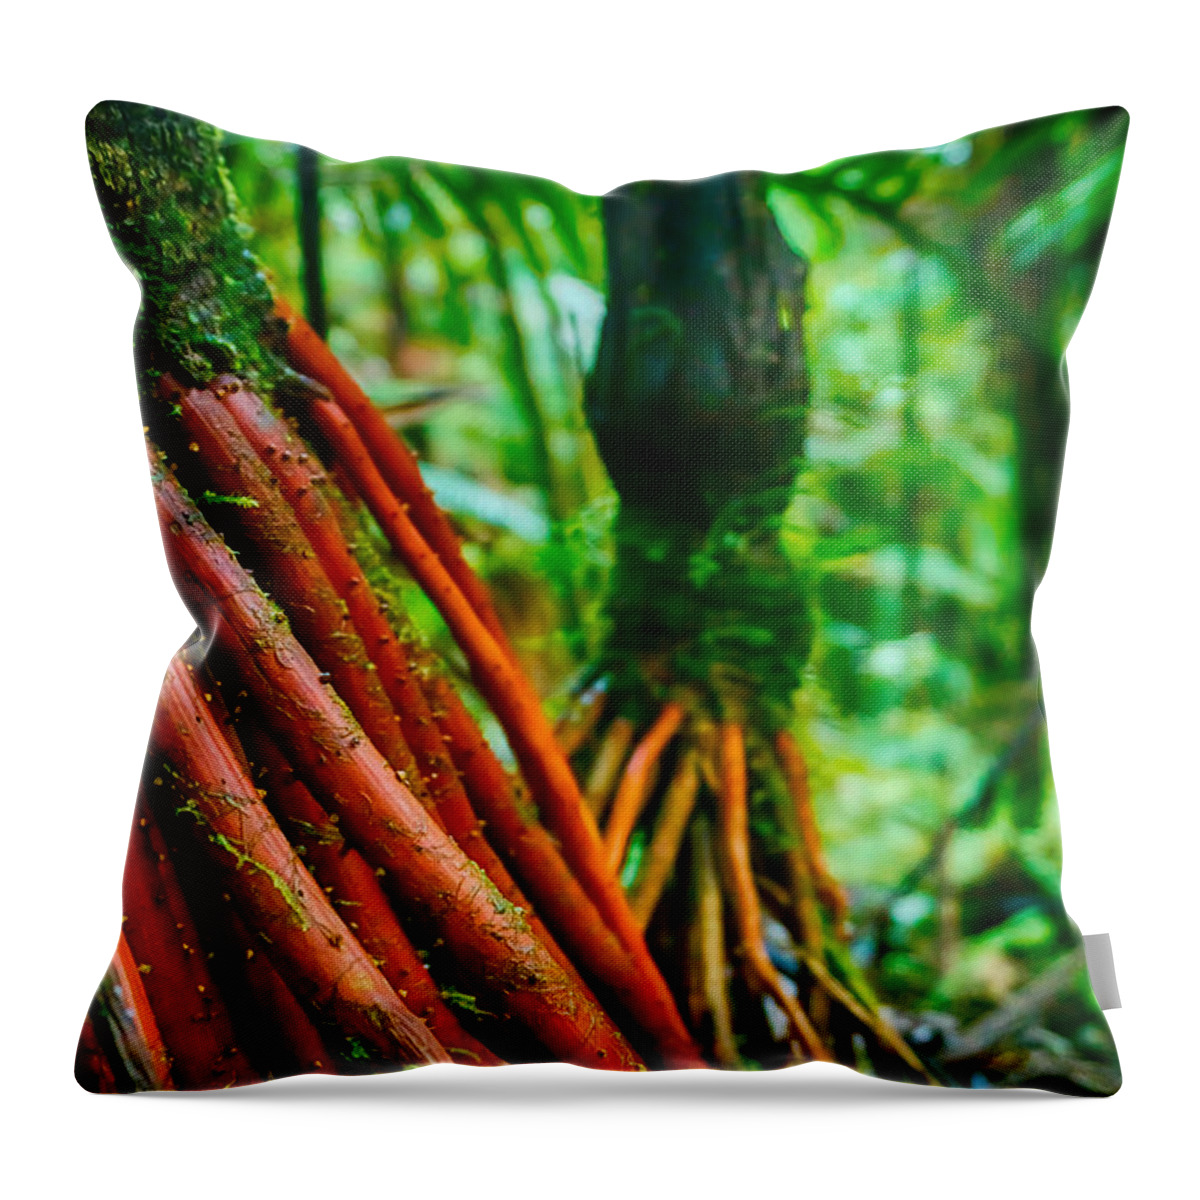 Red Throw Pillow featuring the photograph Red Roots by Amanda Jones